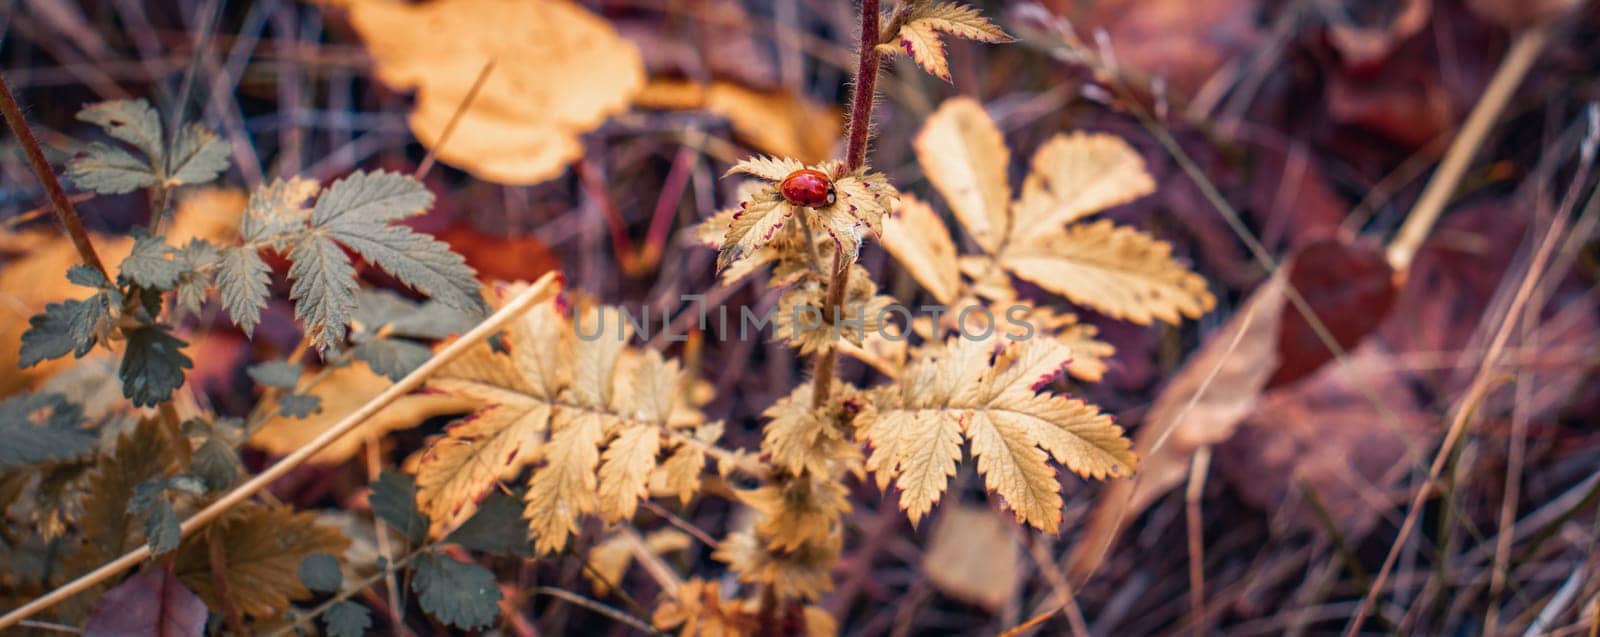 Autumn branch with ladybug close up concept photo. Autumnal bright foliage on ground by _Nataly_Nati_